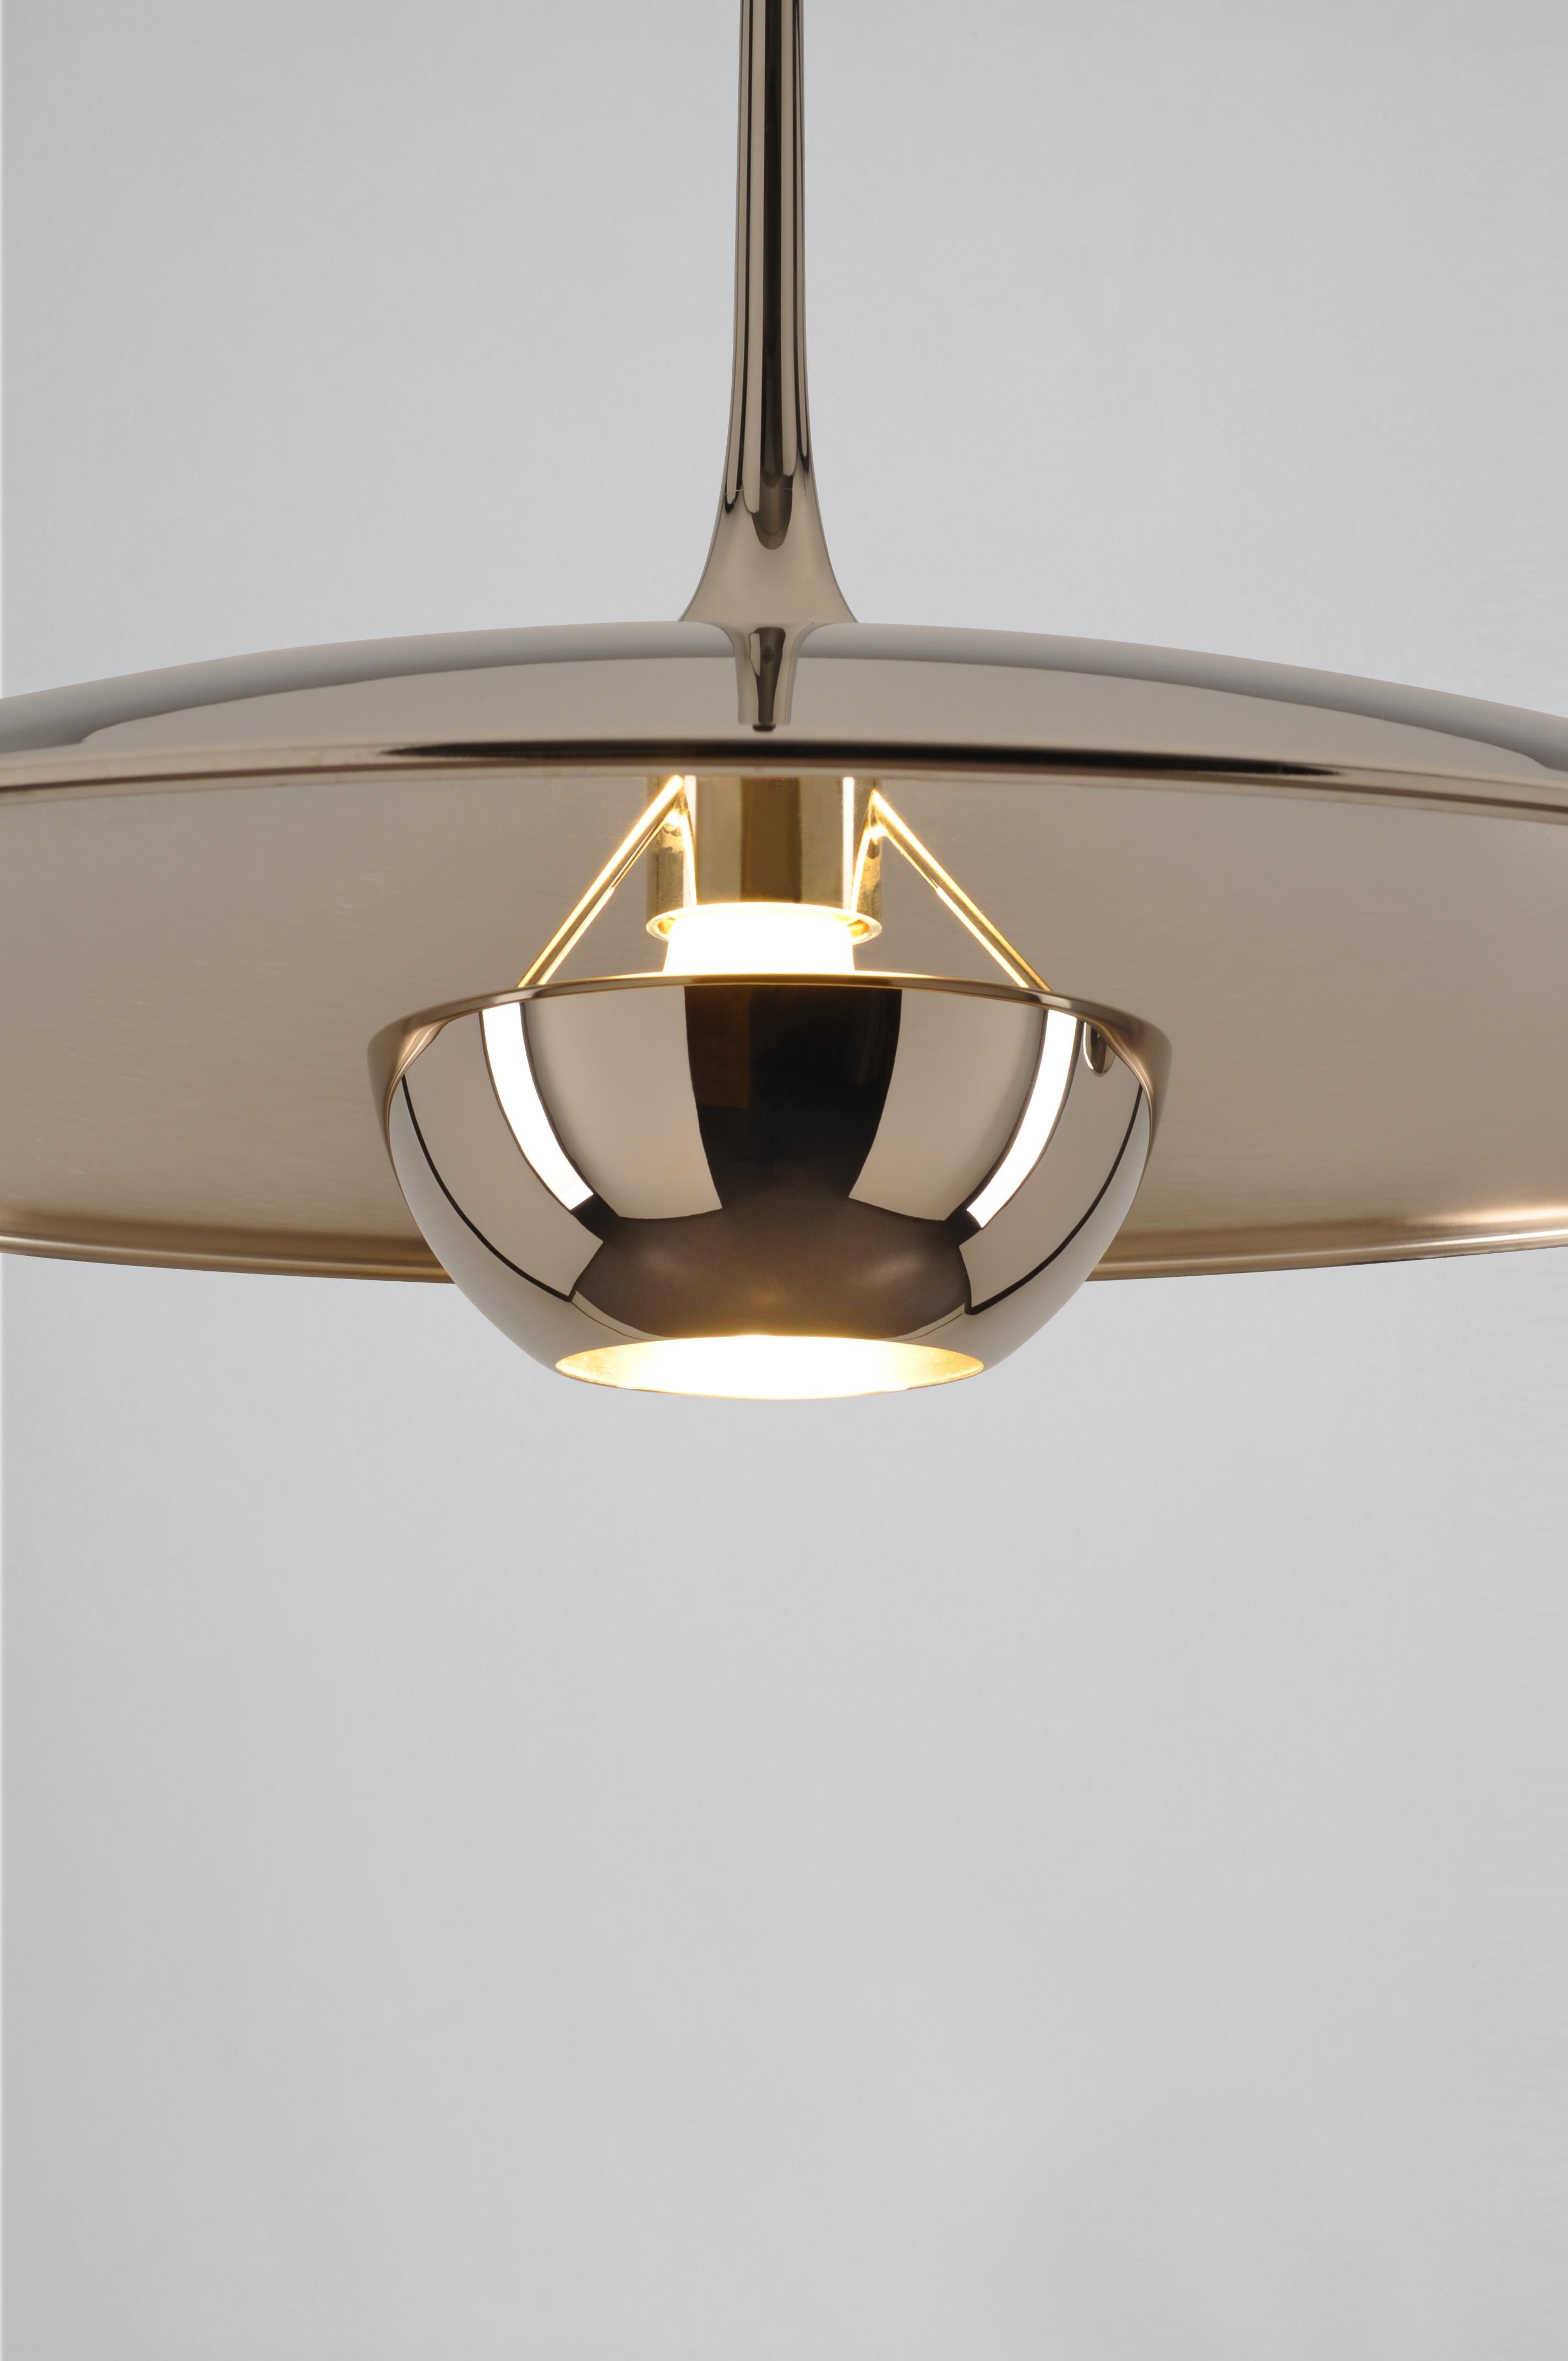 German Florian Schulz Onos 55 Counterbalance Pendant Lamp in Polished Brass or nickel For Sale